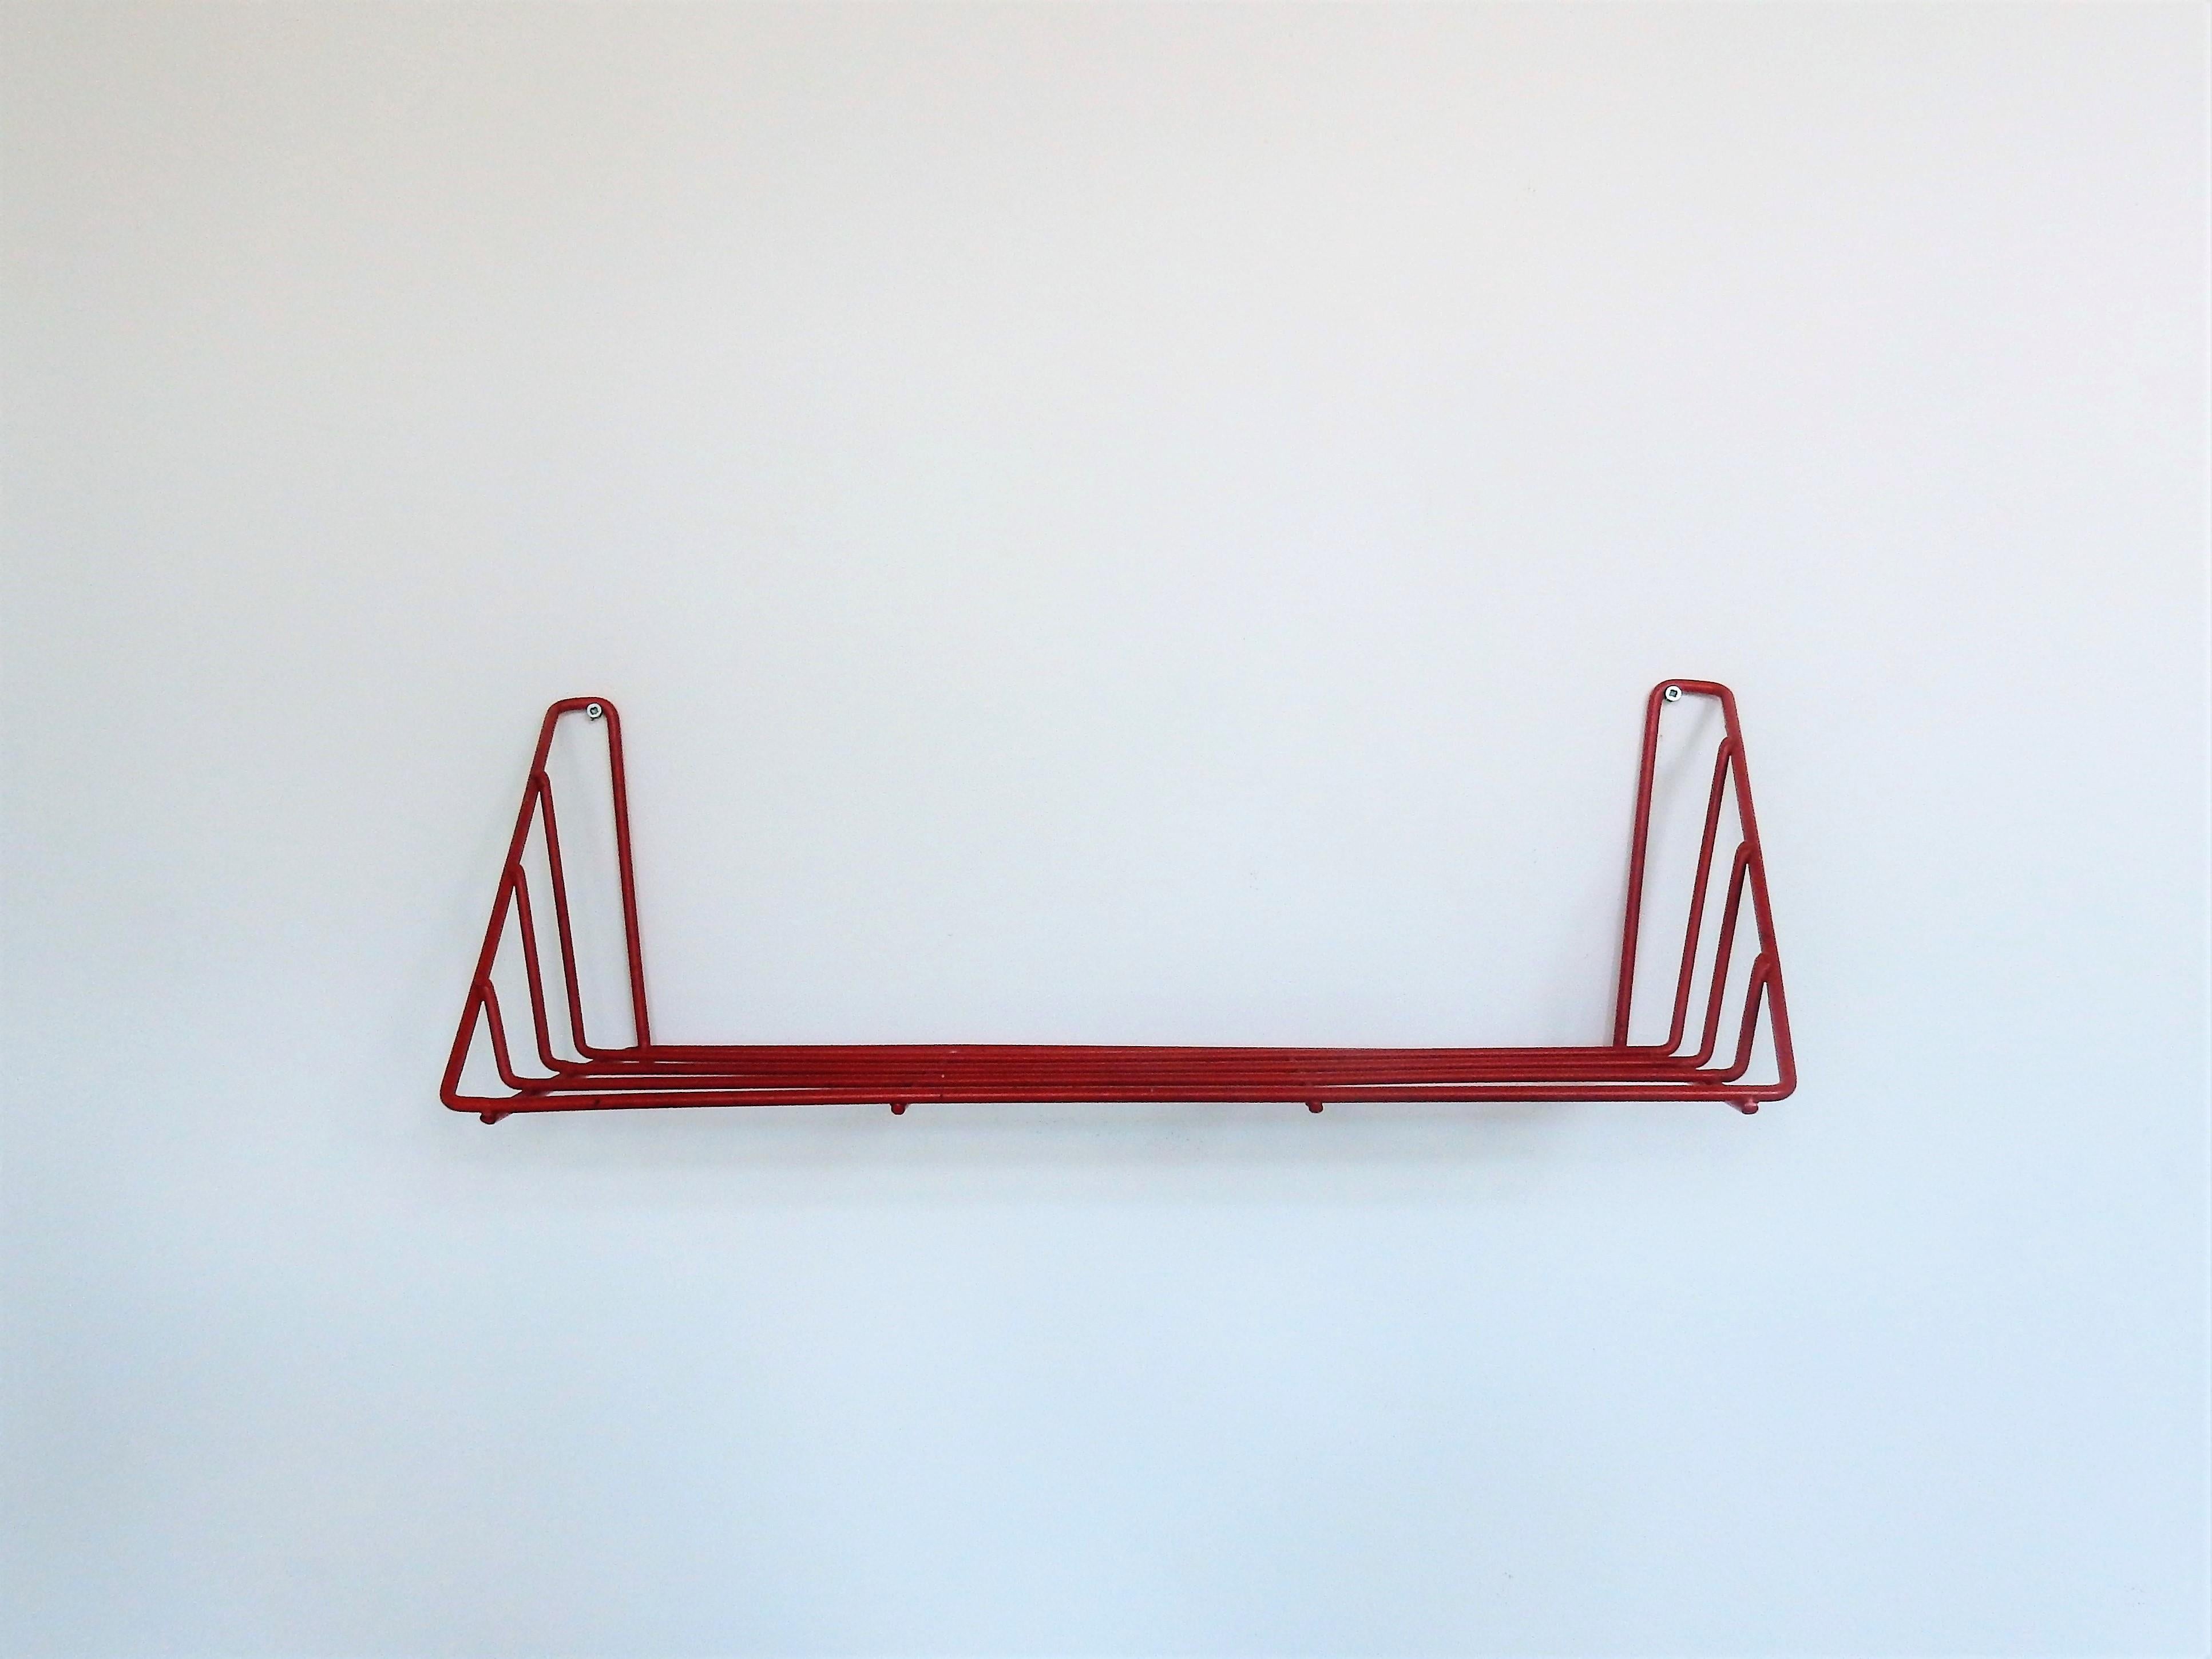 This shelf, called 'Delft' is a design by Constant Nieuwenhuys. Nieuwenhuys was a member of the CoBrA movement. He is known as a fine artist, musician, writer and he was also known for his visionary architectural work, known as 'New